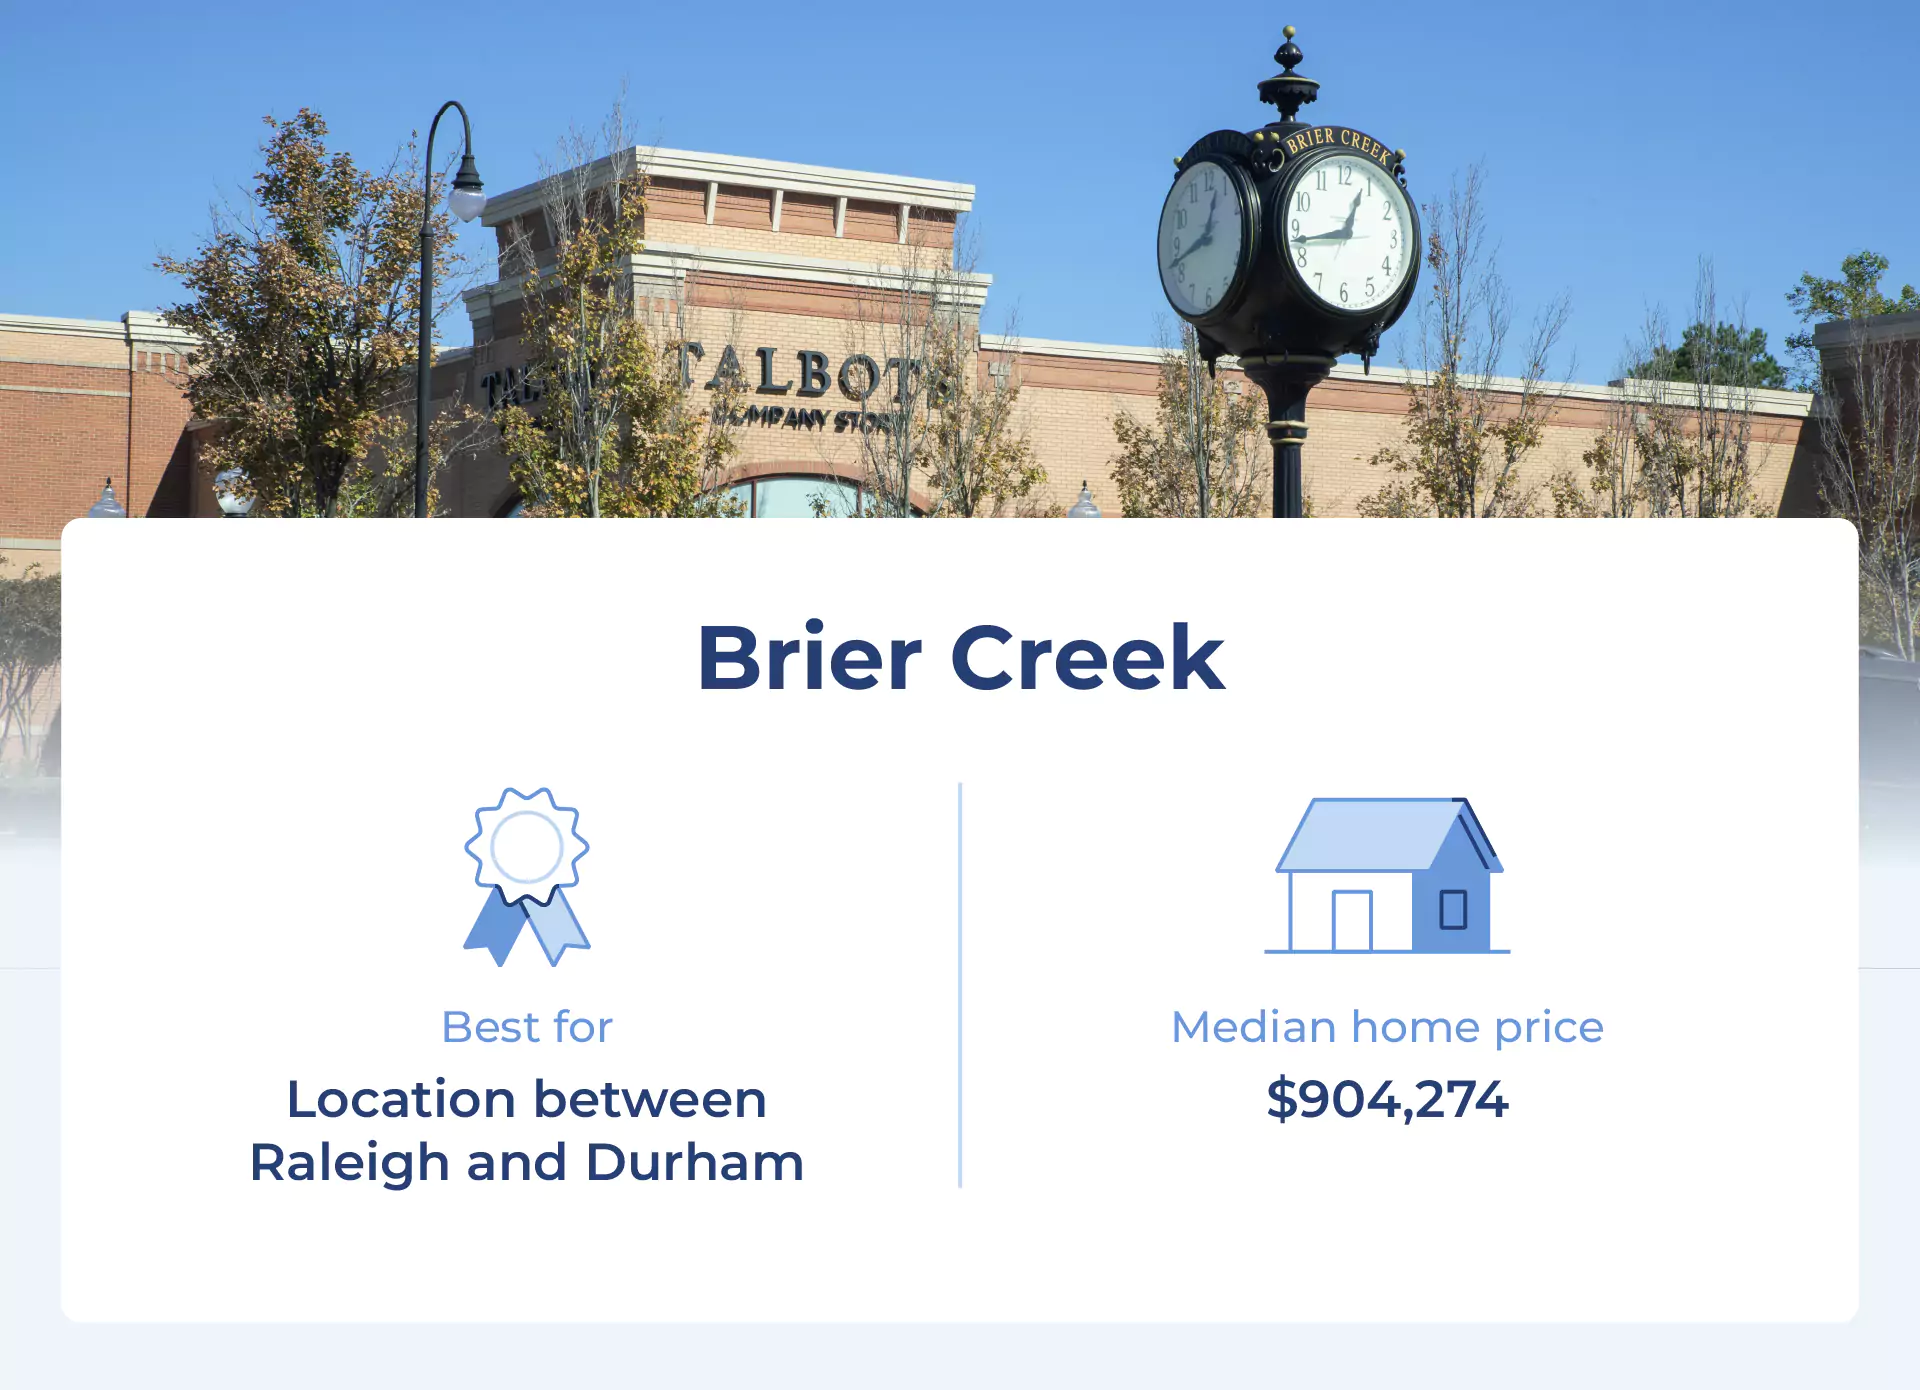 Image shows the median price for one of the best neighborhoods in Raleigh, Brier Creek.